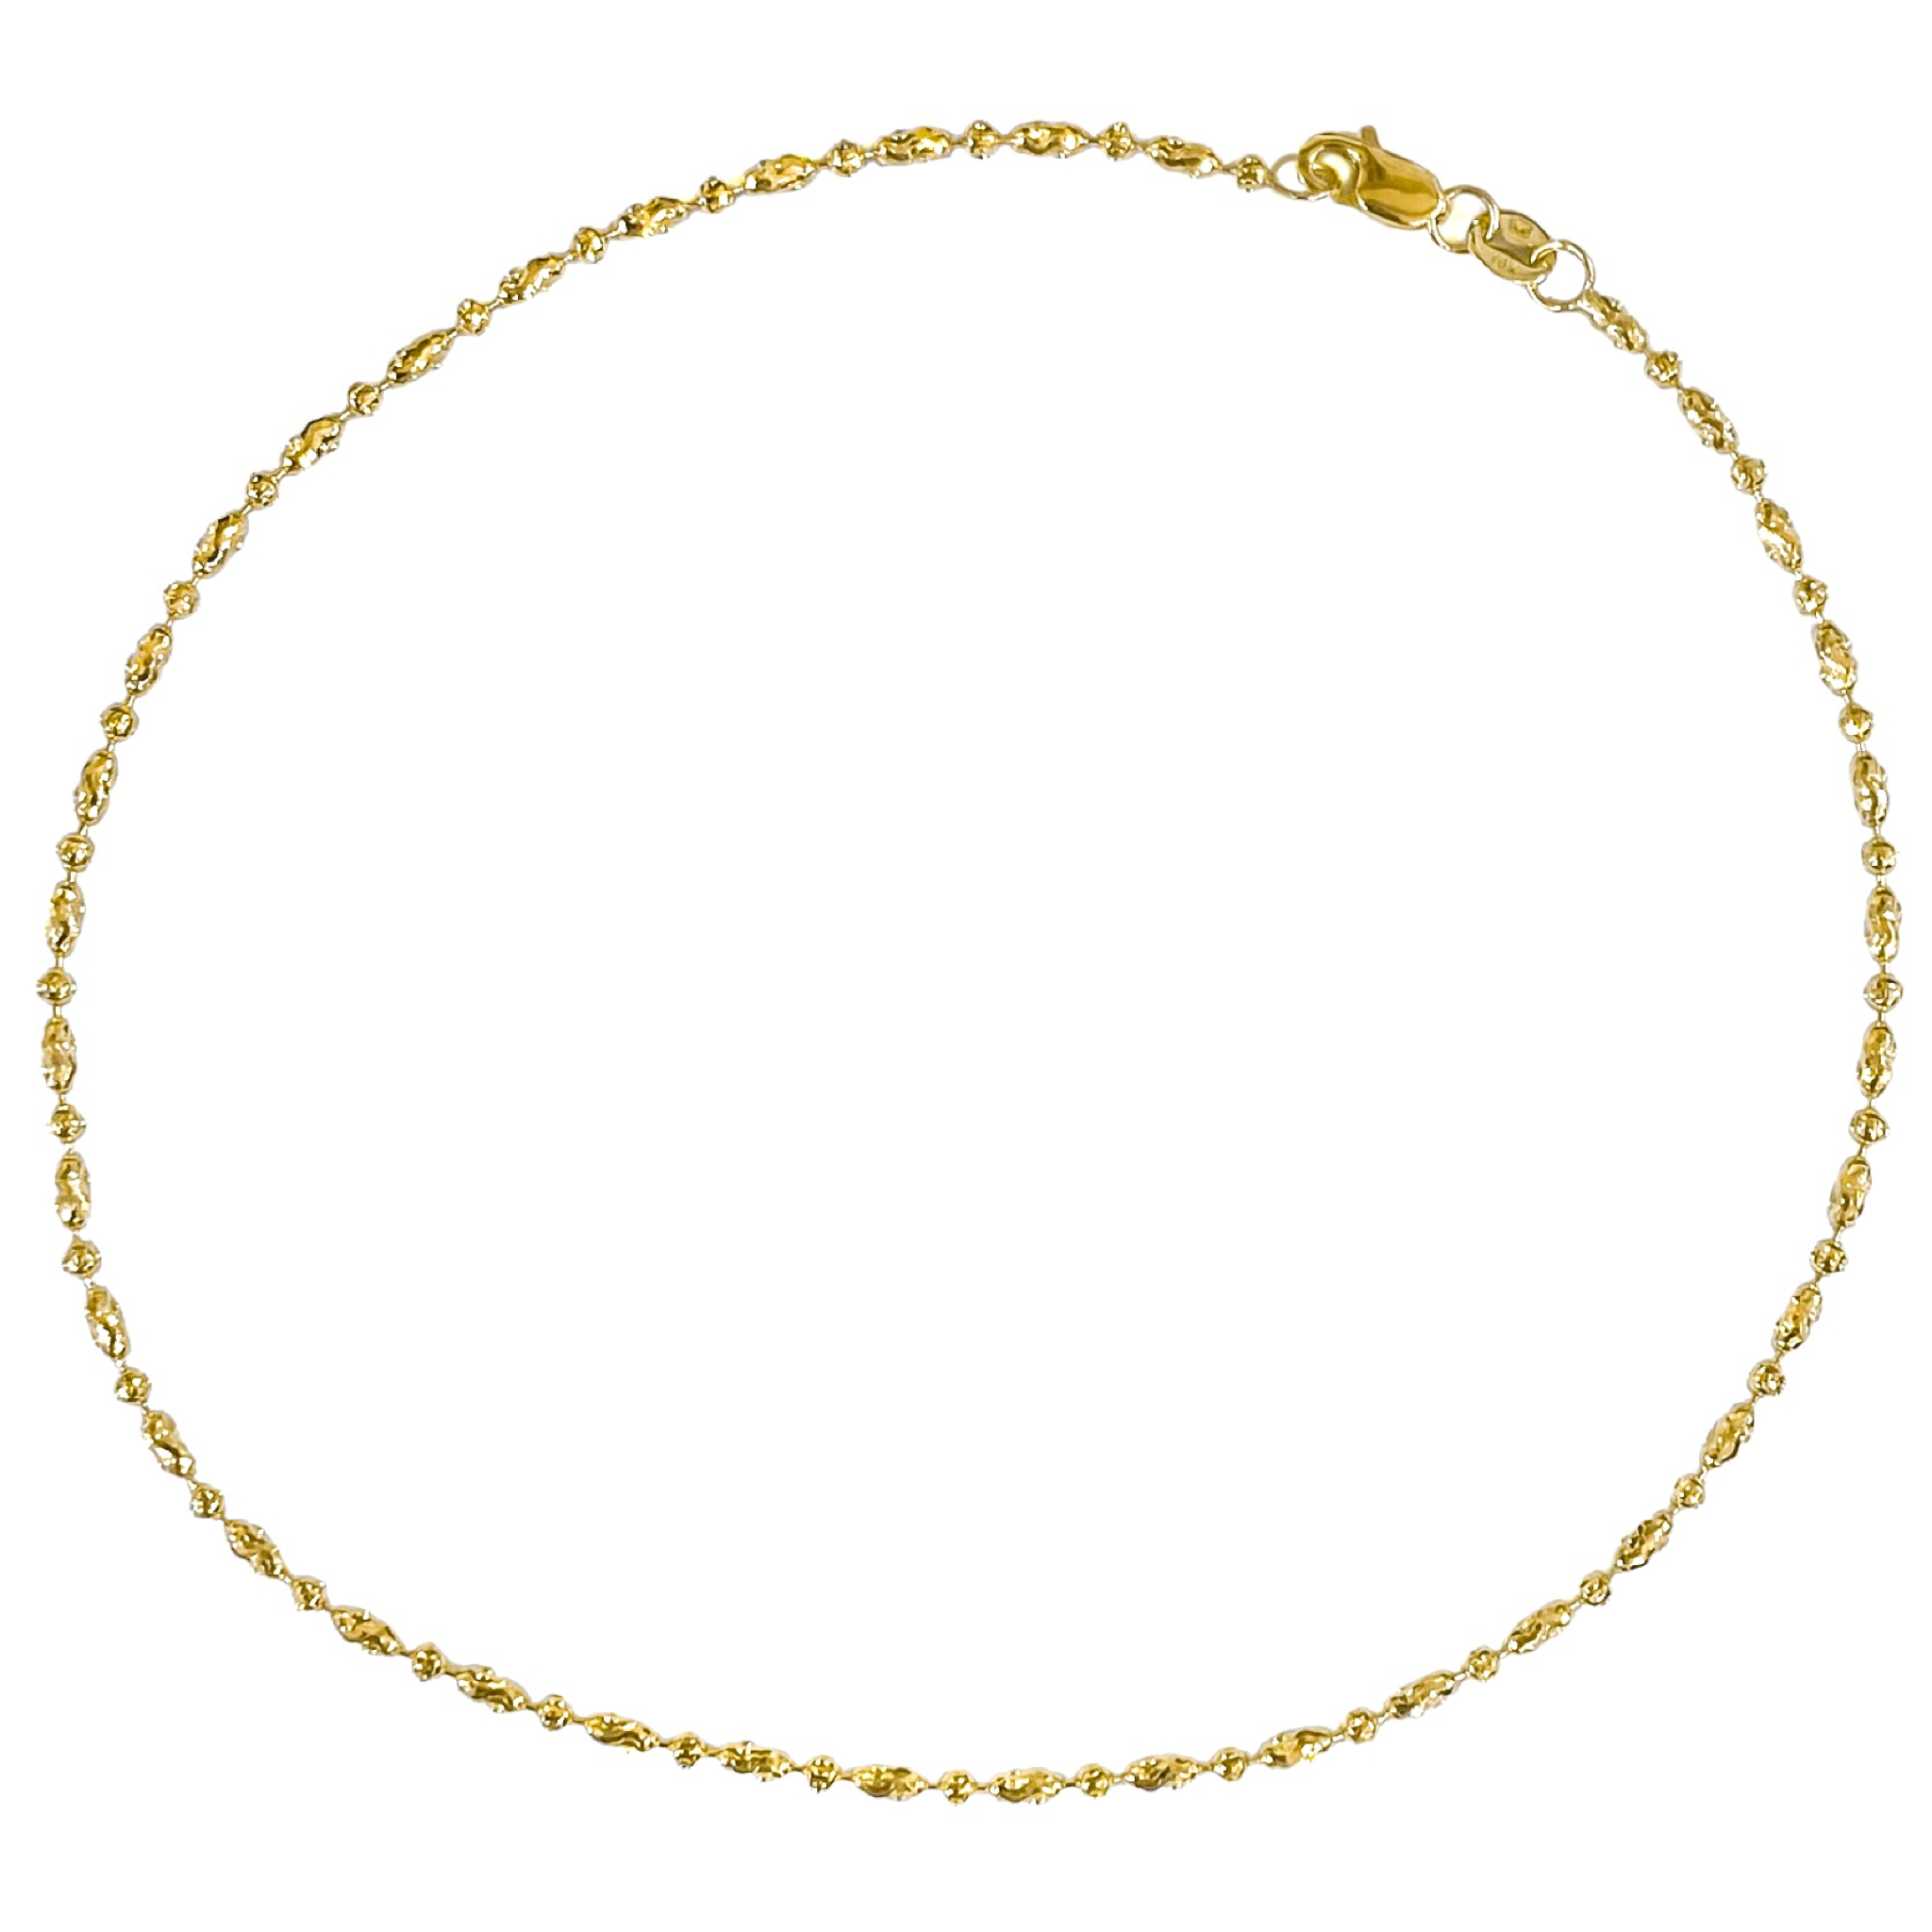 10K YELLOW GOLD MOON CUT BEADED ANKLET